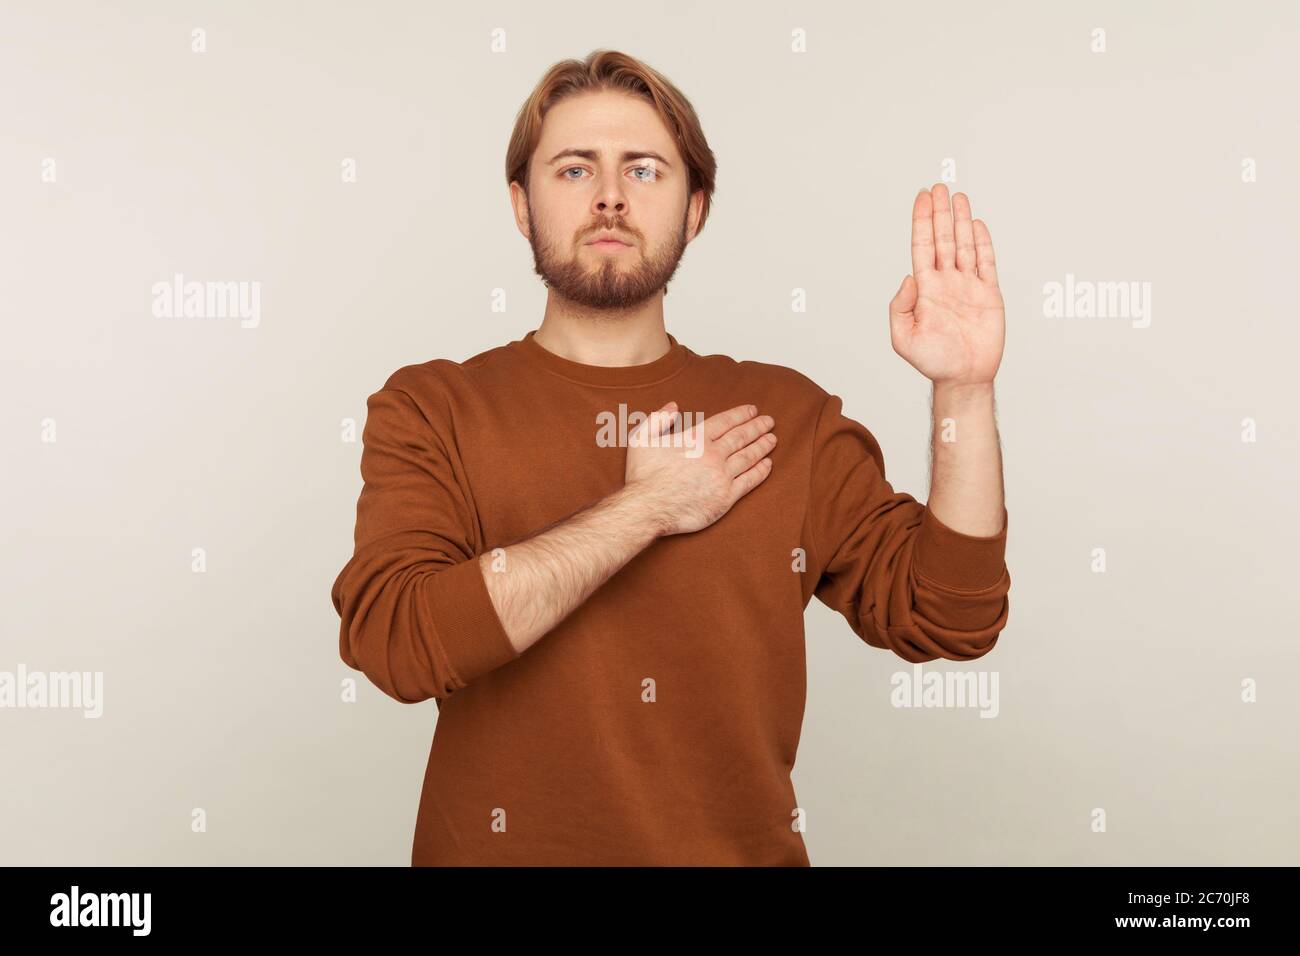 I promise to tell truth! Portrait of honest responsible bearded man in sweatshirt standing raising hand and saying swear, making loyalty oath, pledgin Stock Photo